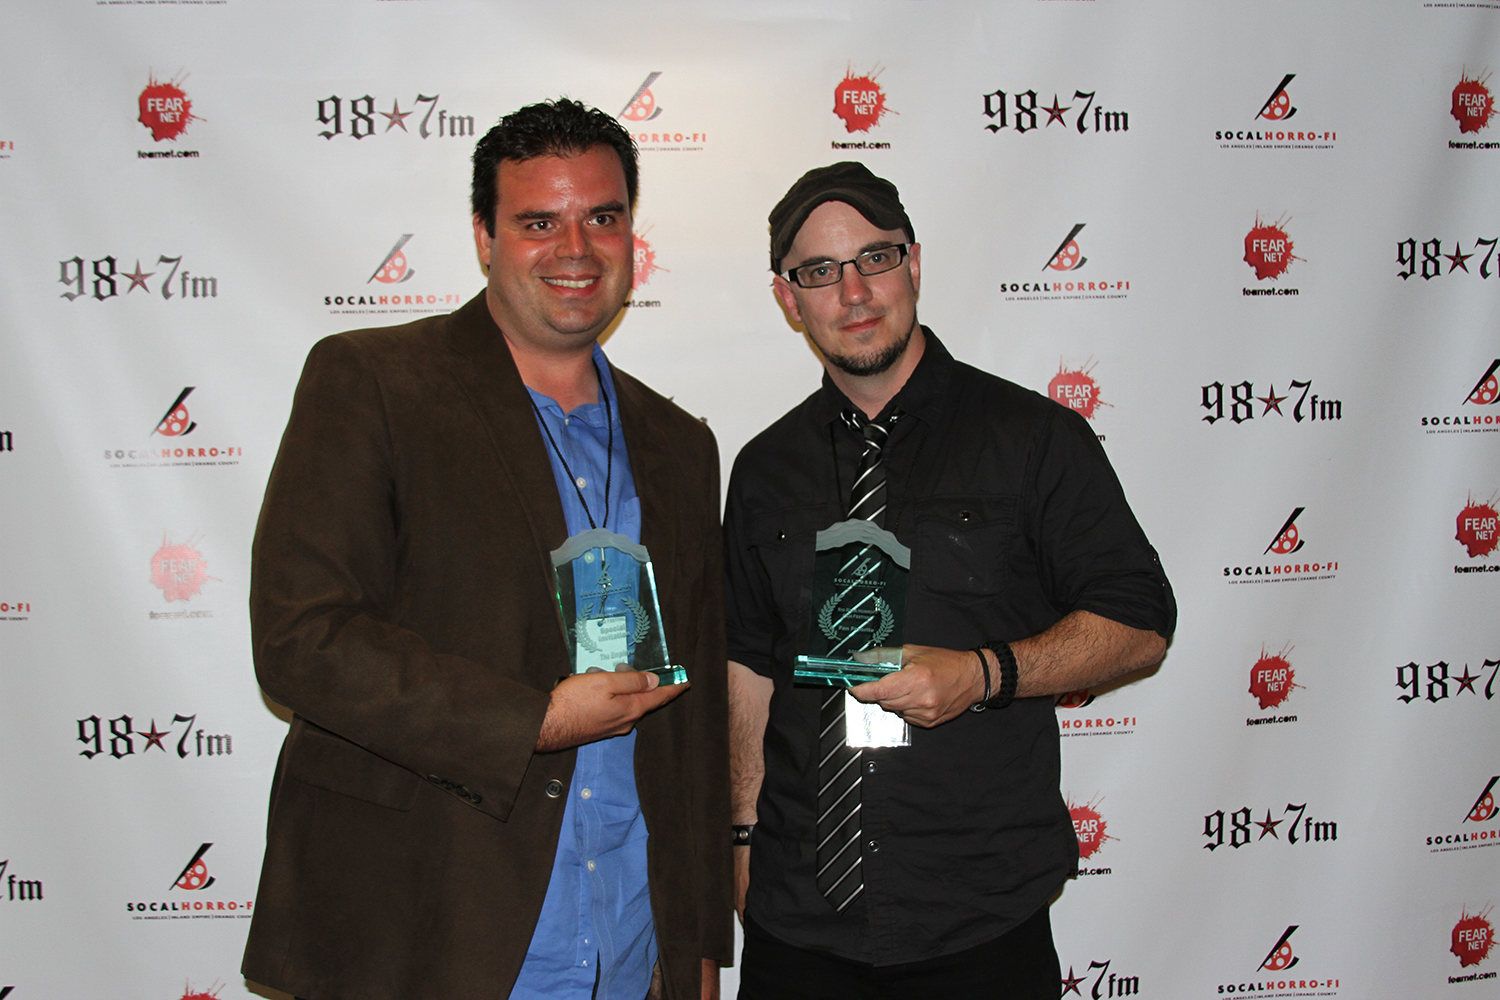 BBHFF award-winning directors Frank Merle (The Employer) and Jim Towns (House of Bad)